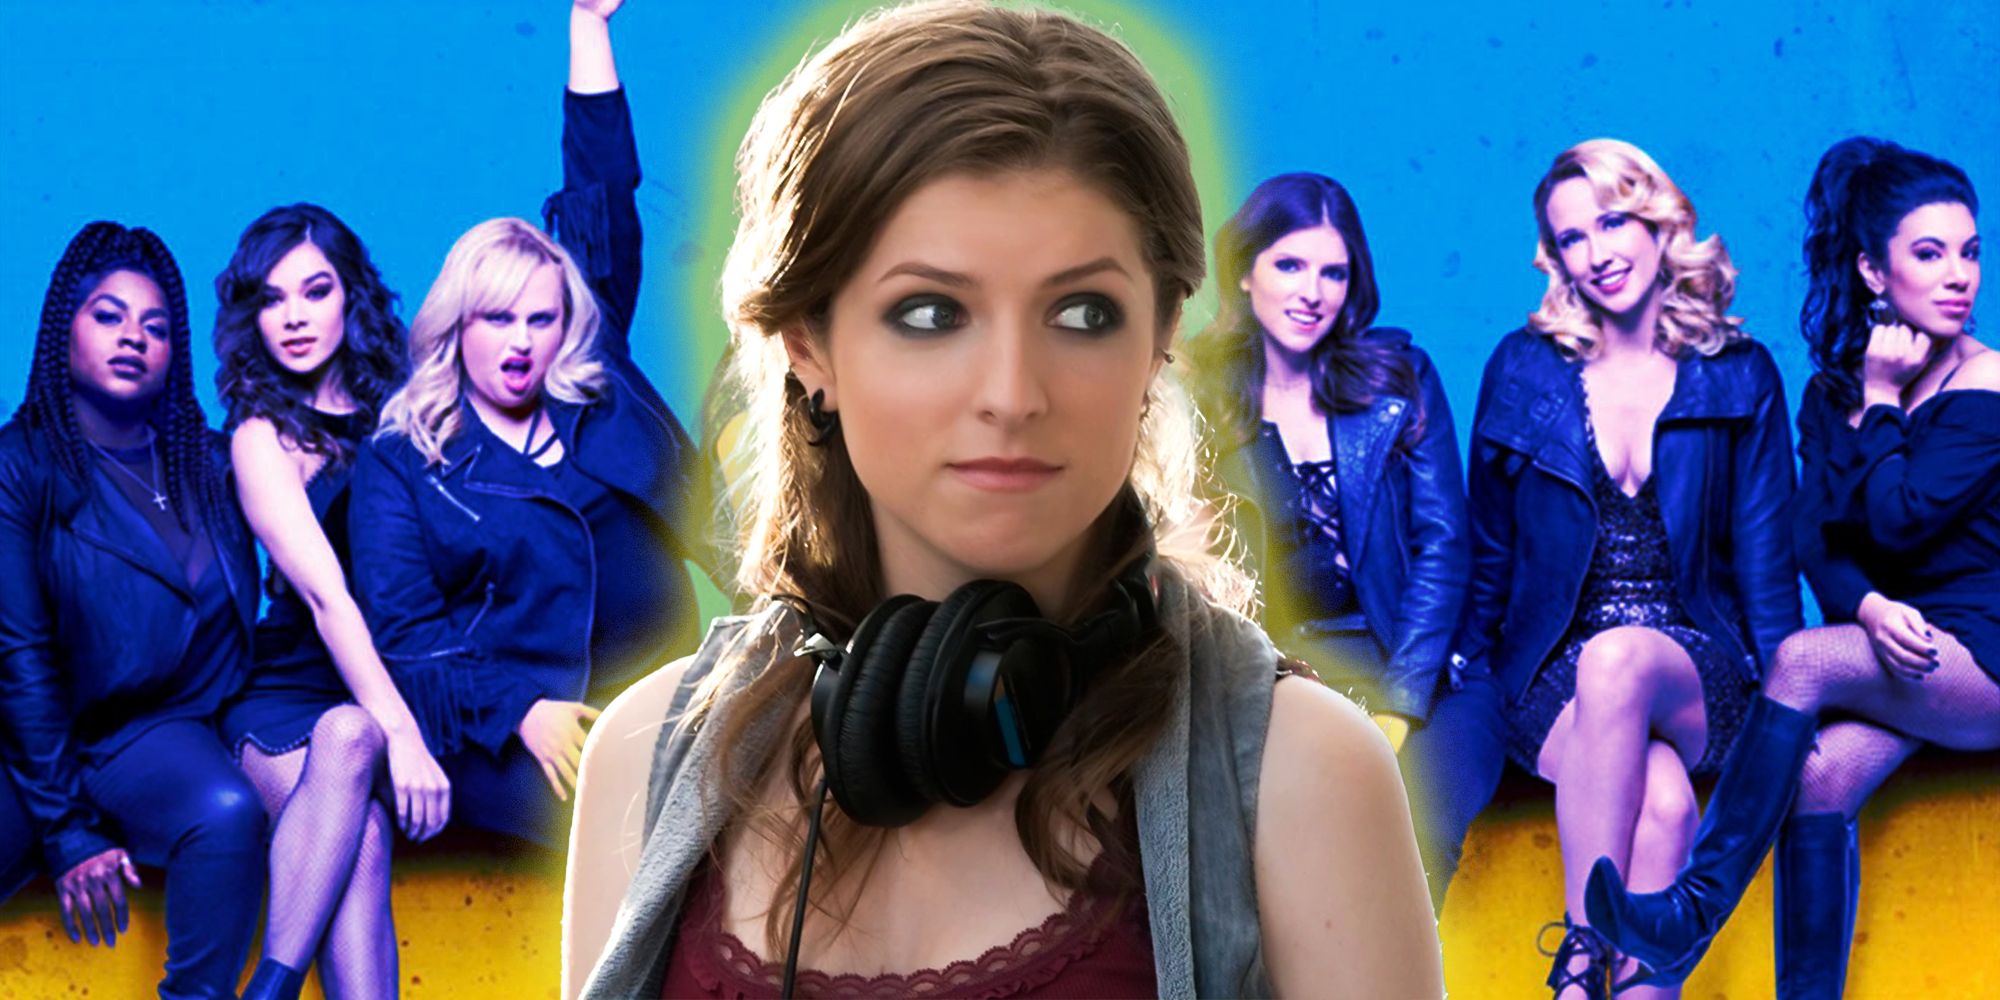 Anna Kendrick in the center as Becca in Pitch Perfect (2012) with the Barden Bellas cast of Pitch Perfect 3 behind her